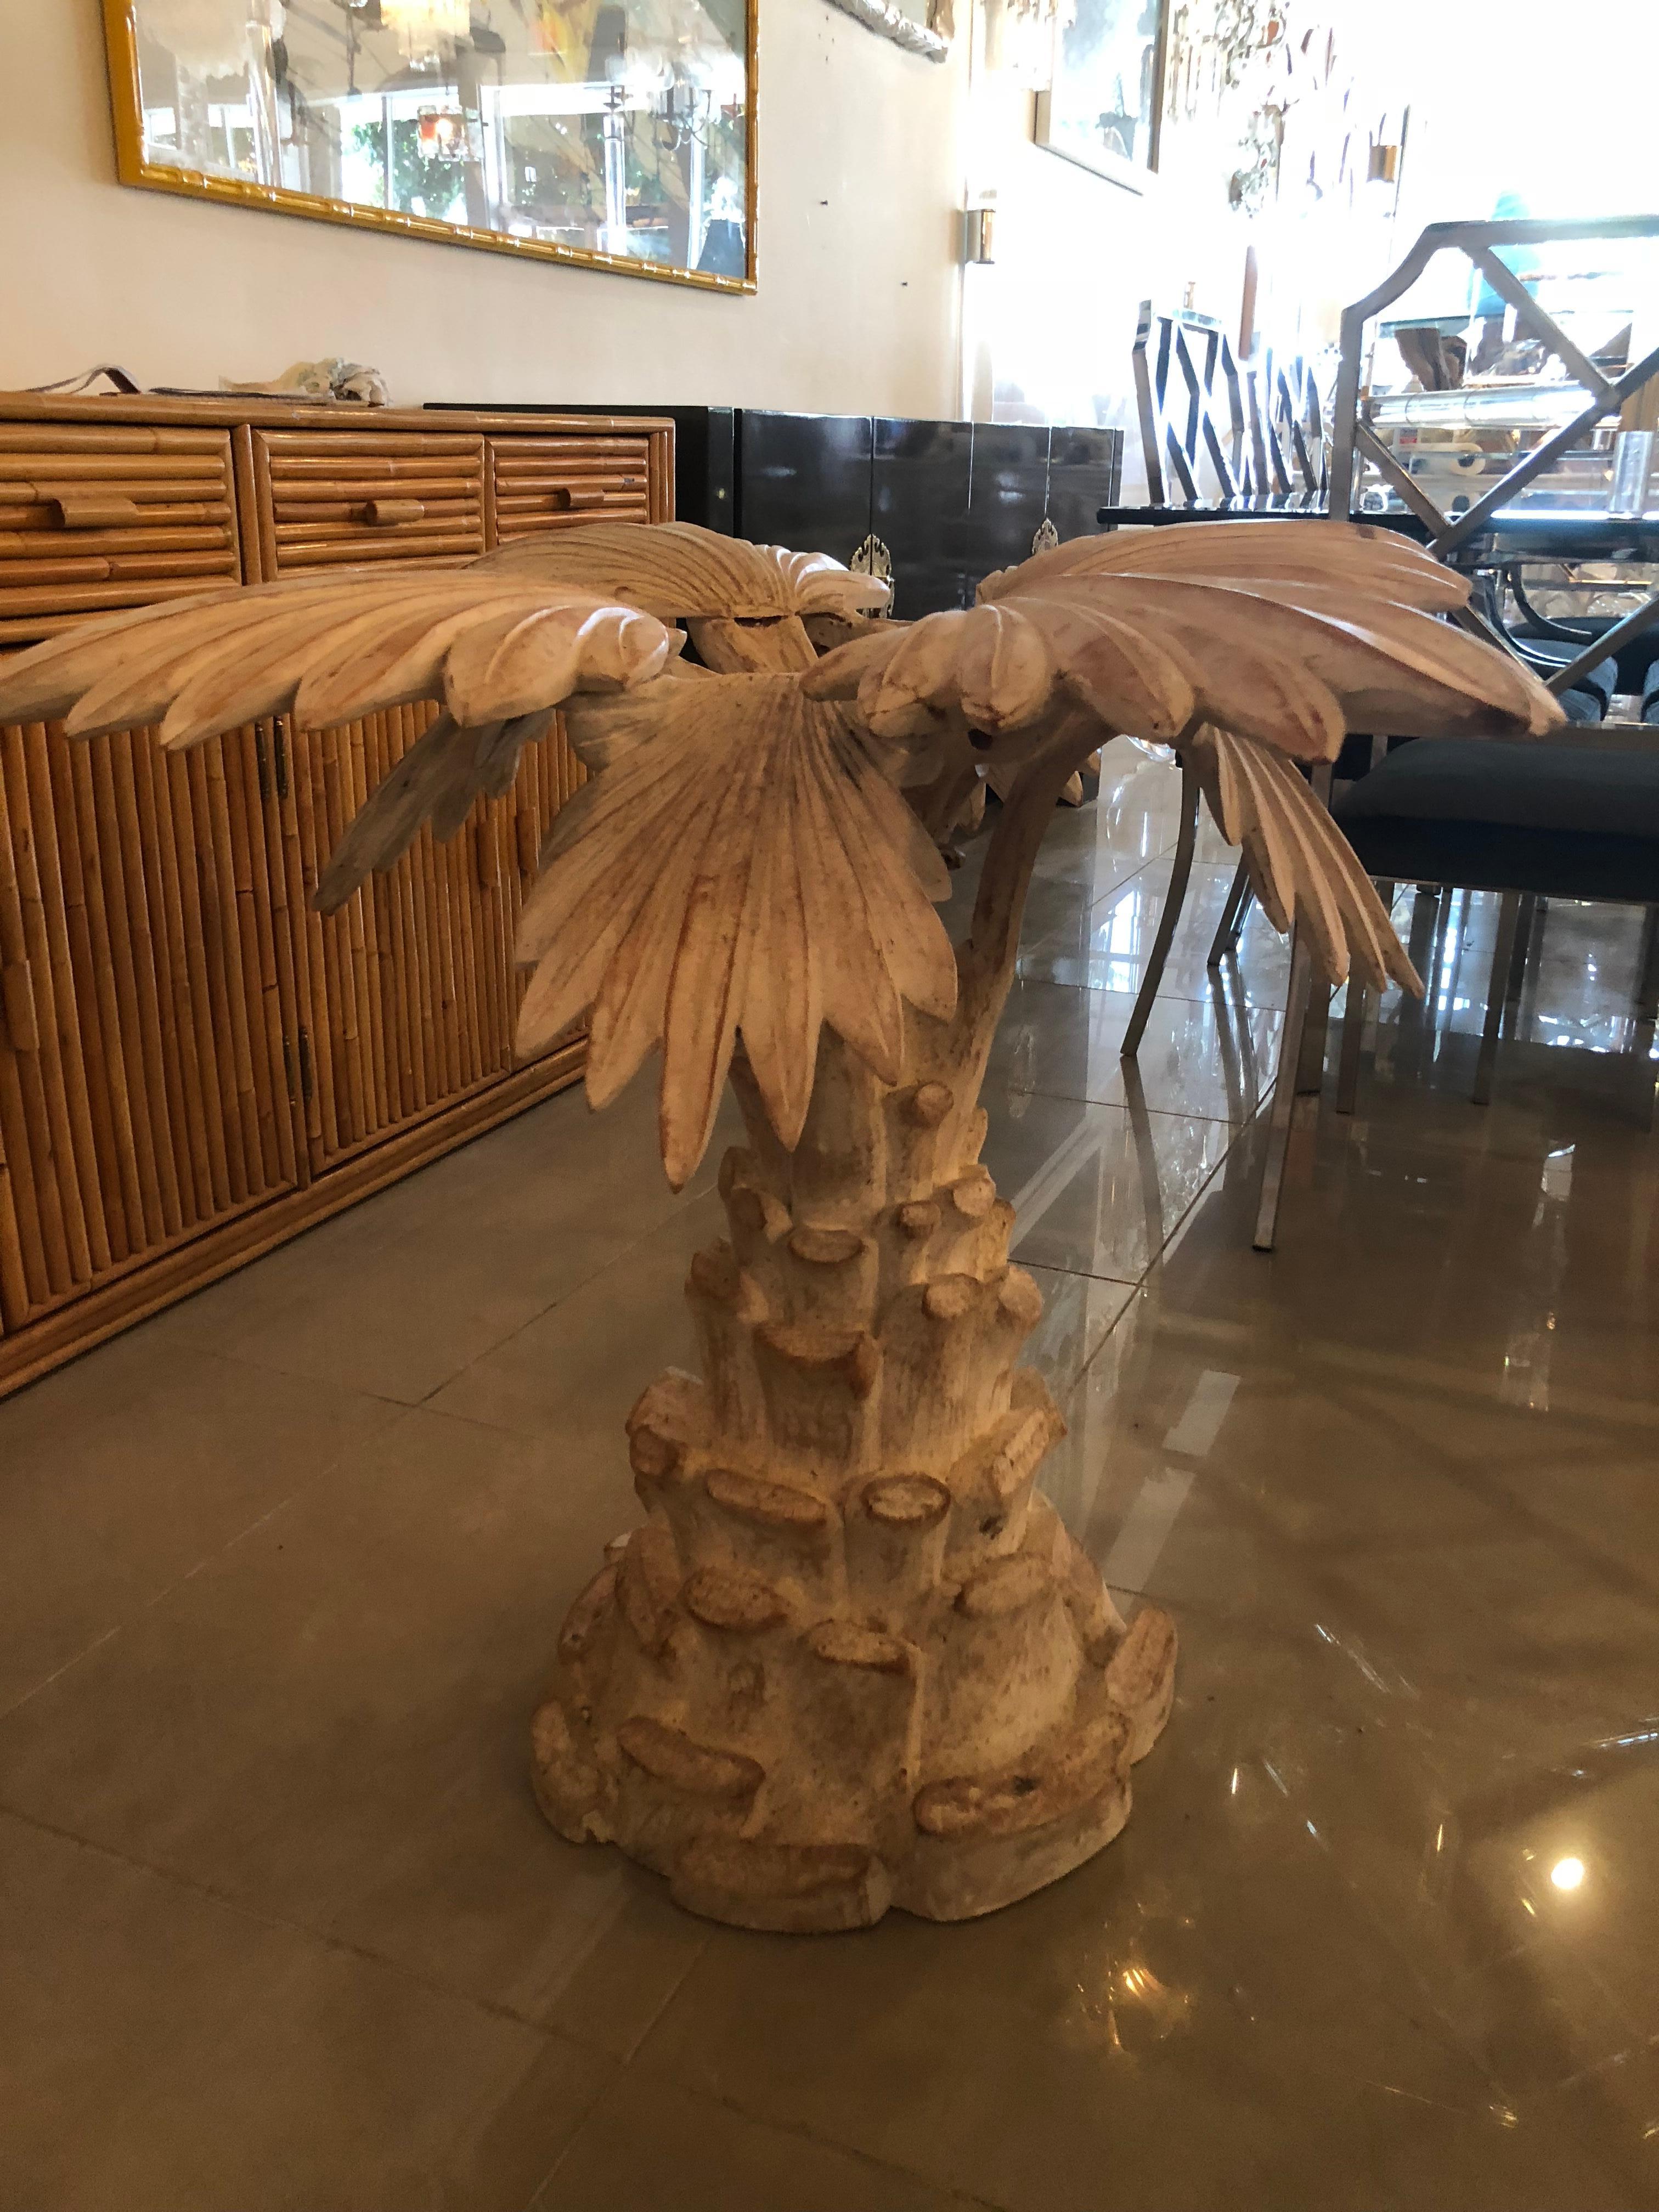 The most amazing vintage palm tree frond leaf table base. This can be used as a game table, dining table, or entry table. A piece of glass would go on top of it. I recommend square, round, or octagonal. The piece is carved wood, stamped on bottom